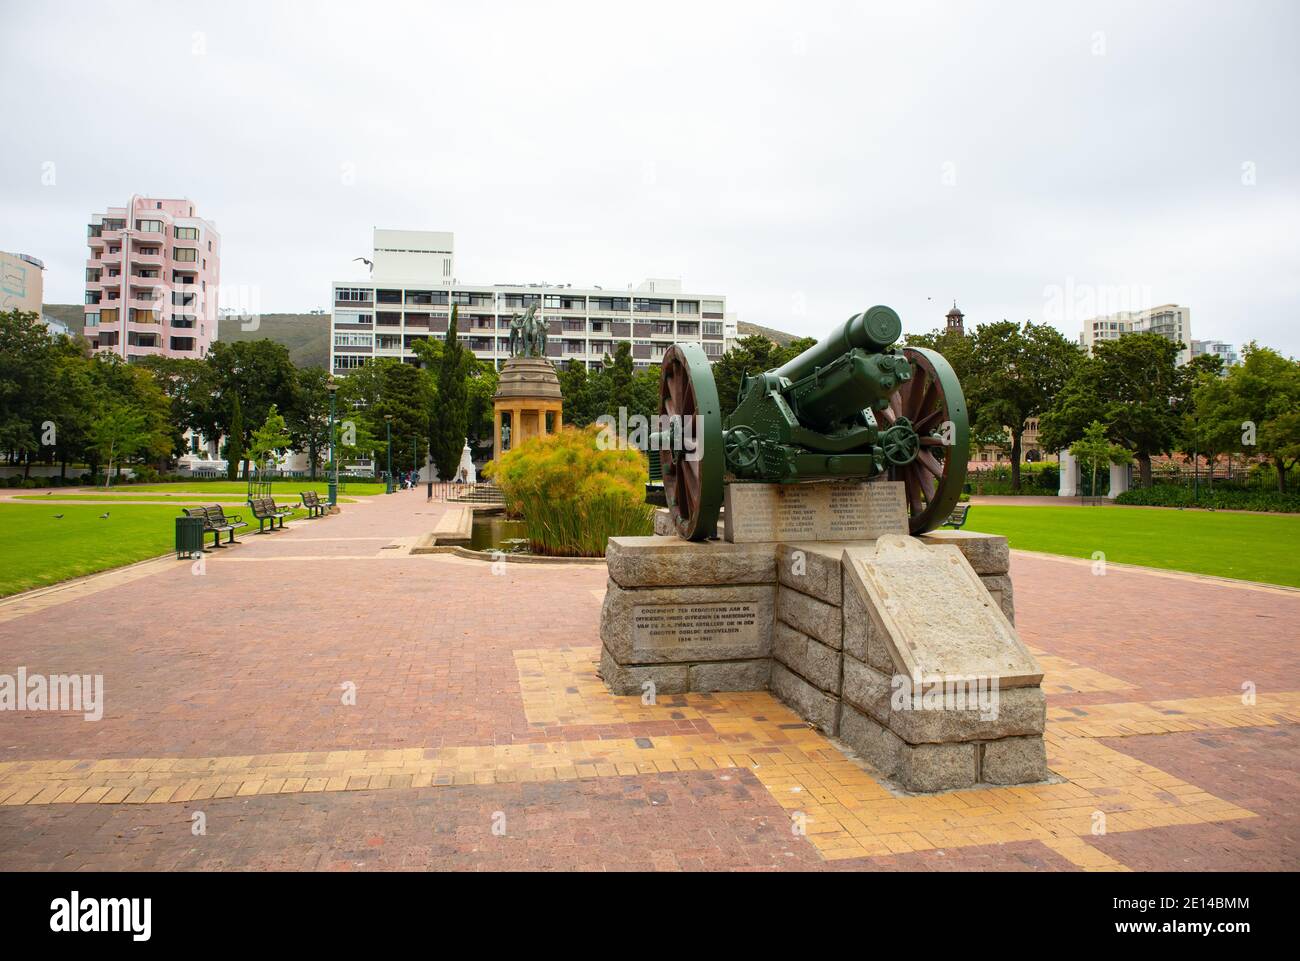 Gardens-  Cape Town, South Africa - 23/11/2020 Green canon statue, standing in Gardens. Surrounded by vibrant greenery and colorful buildings. Stock Photo